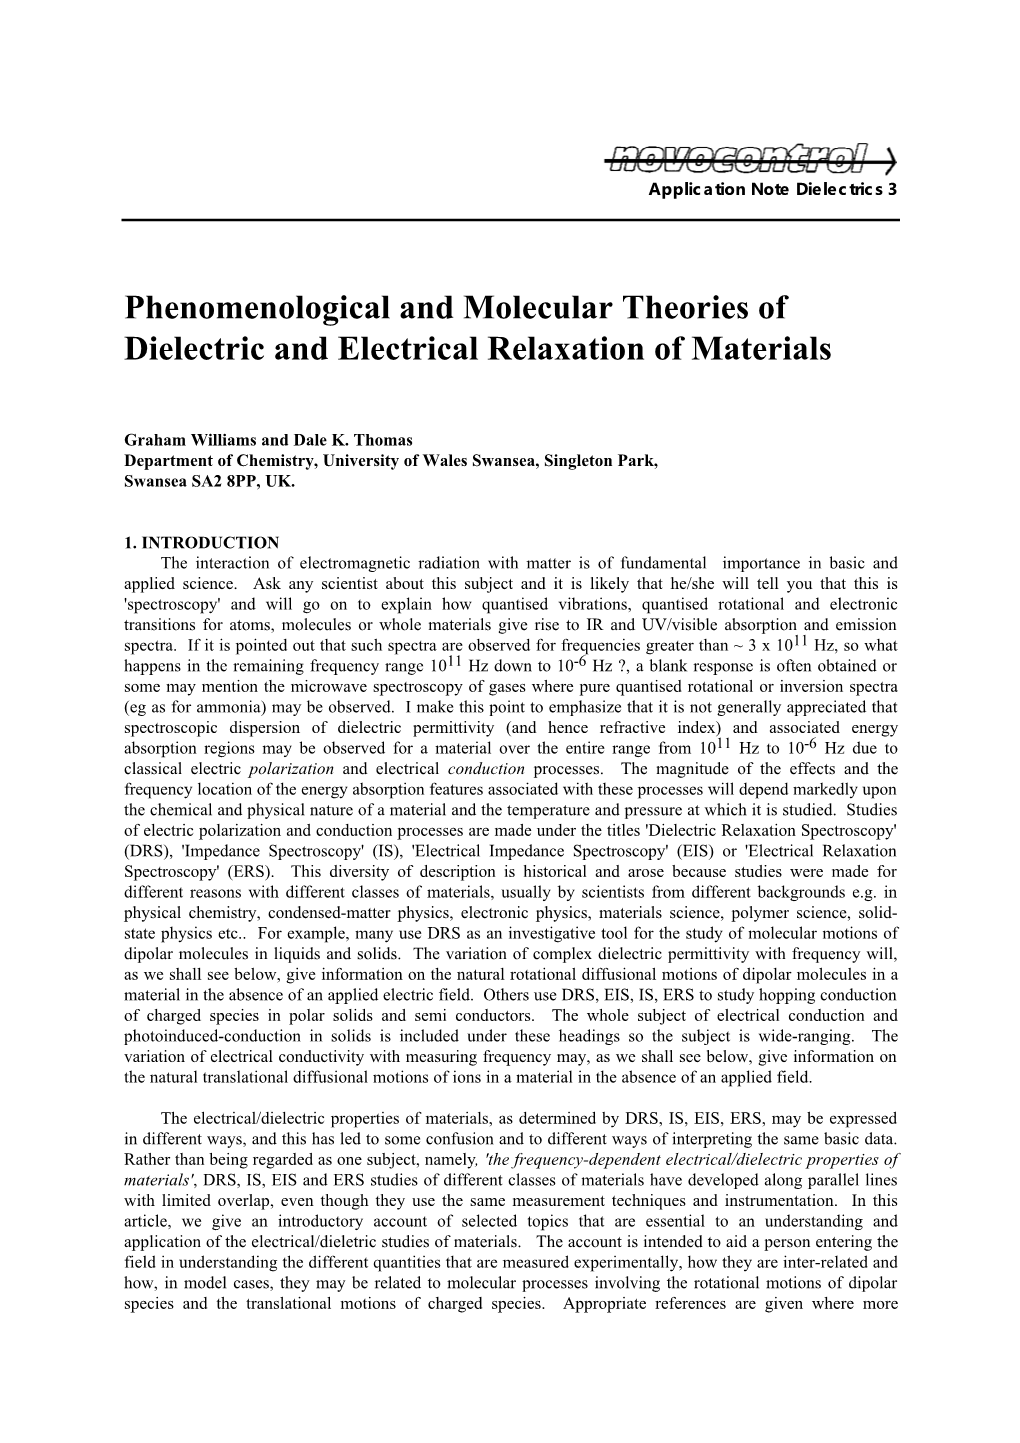 Phenomenological and Molecular Theories of Dielectric and Electrical Relaxation of Materials